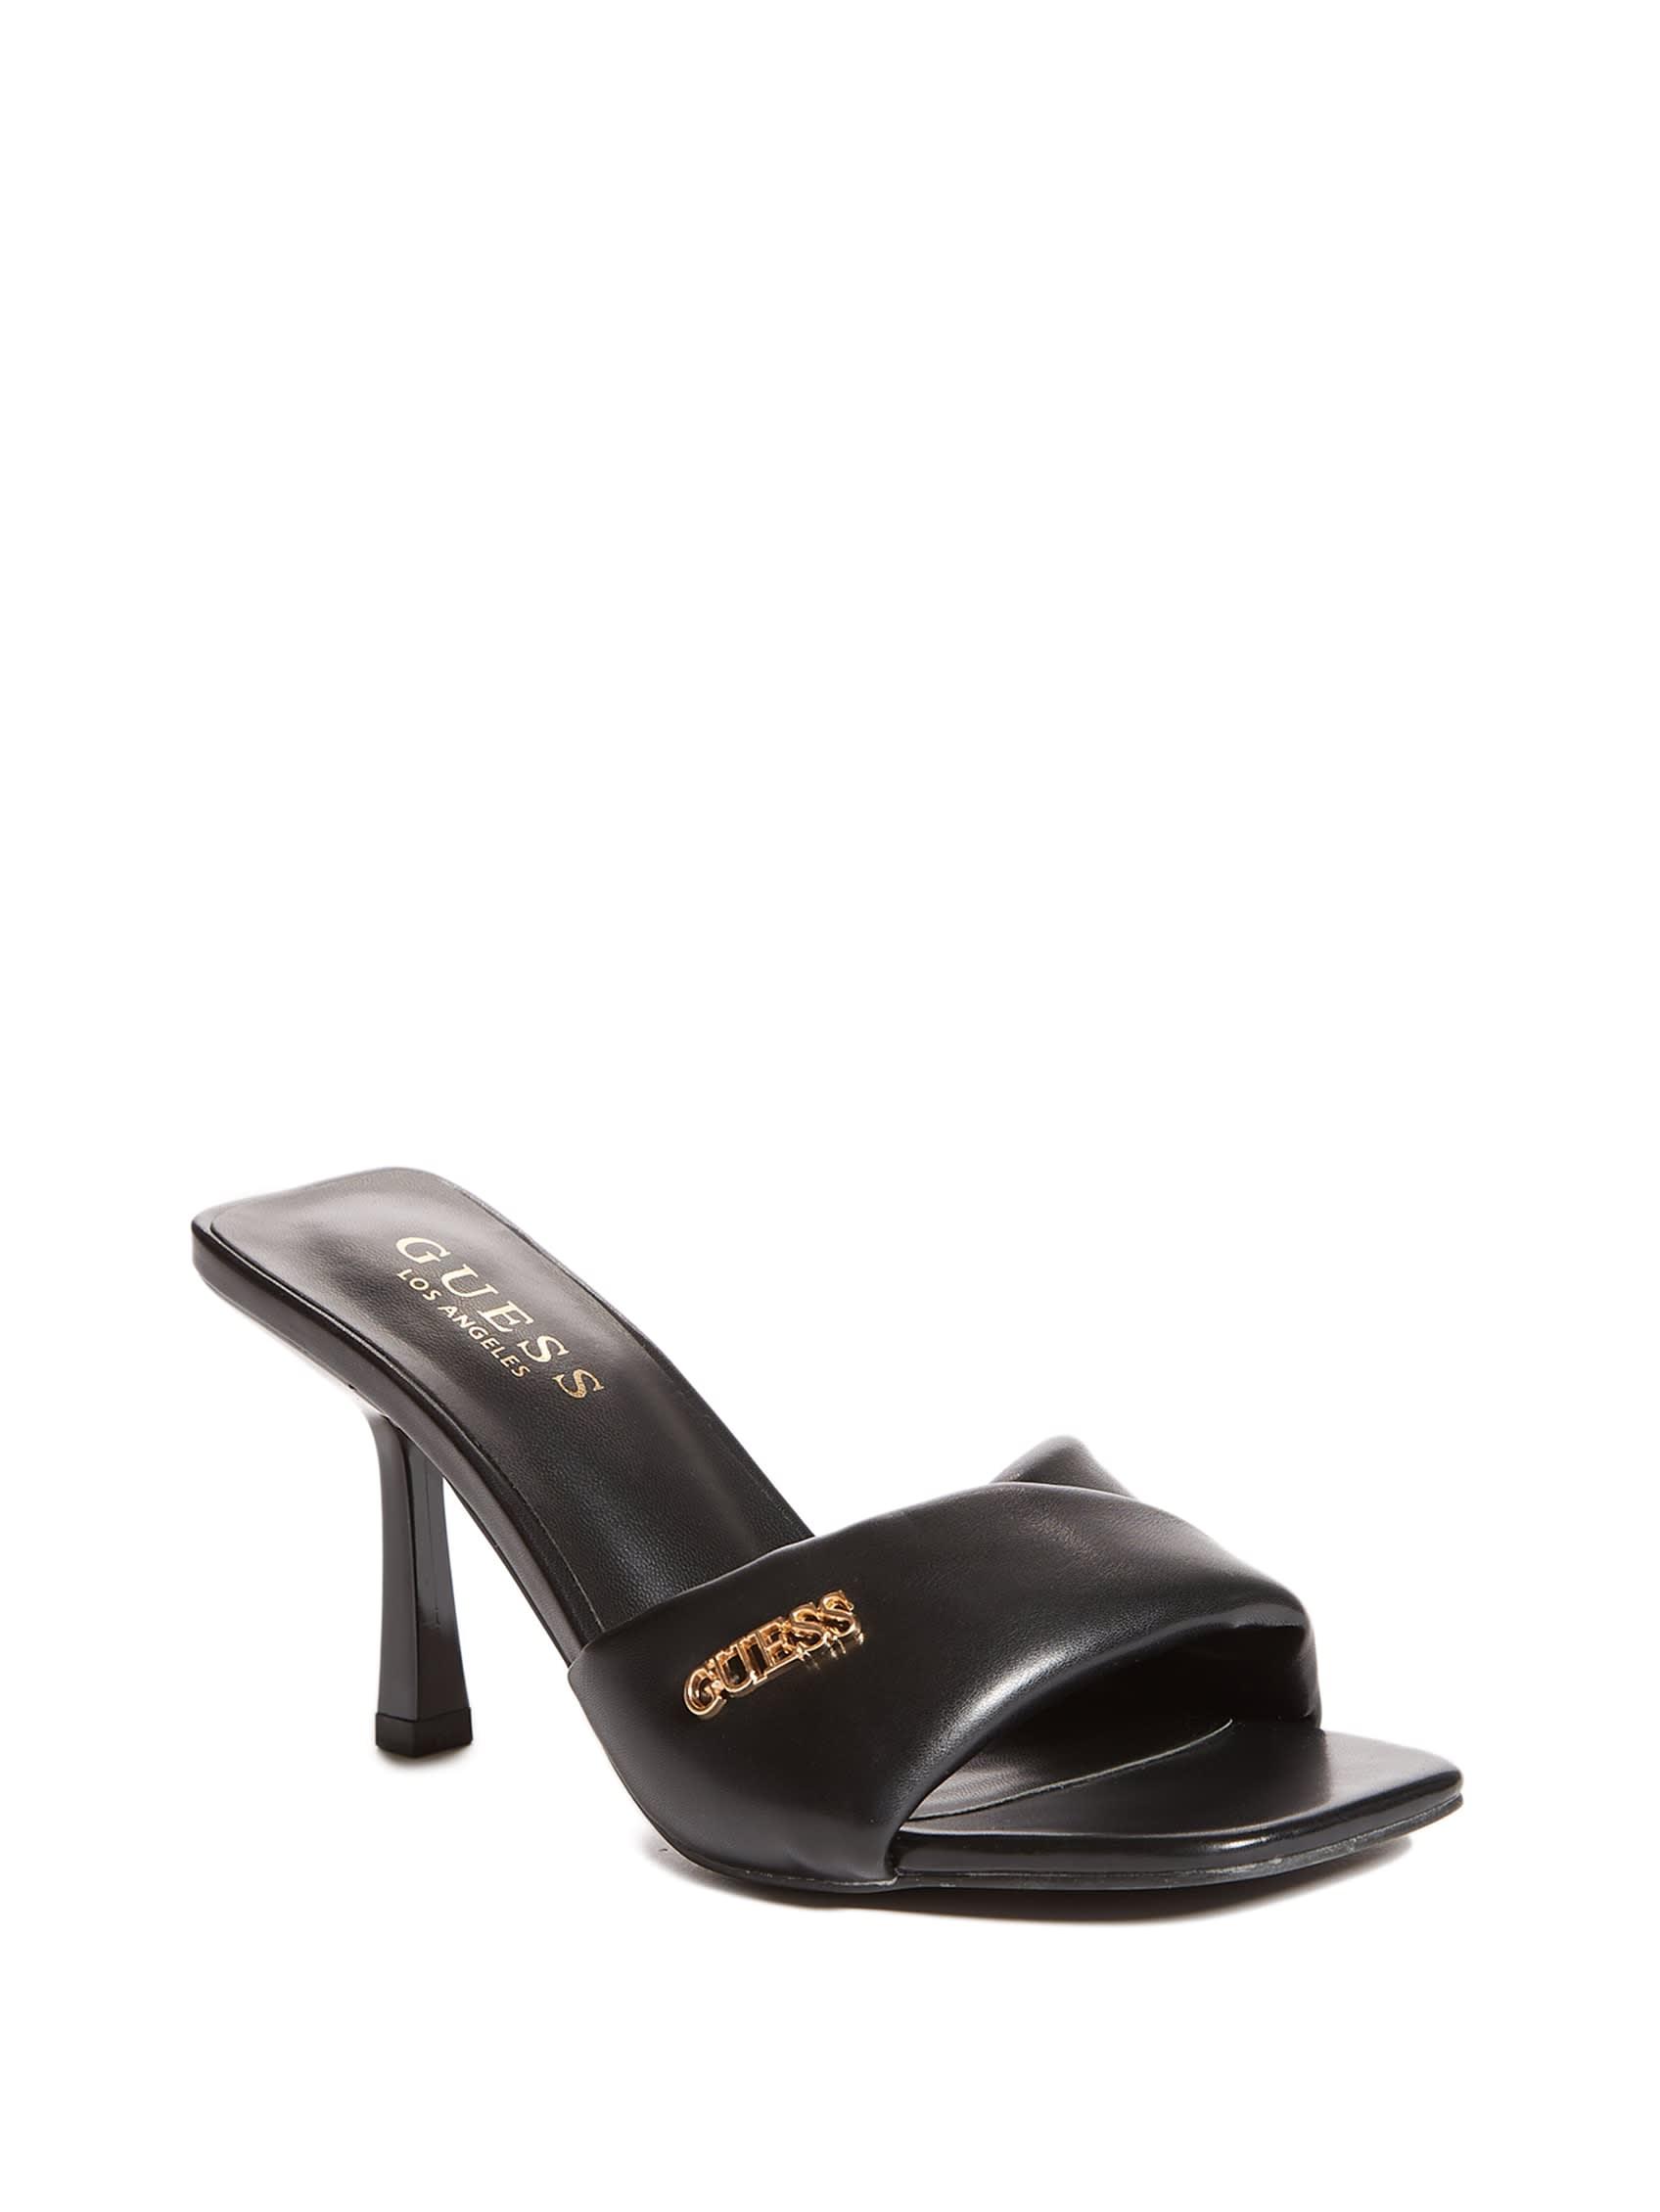 Guess Factory Sydni Slide Heels in Brown | Lyst